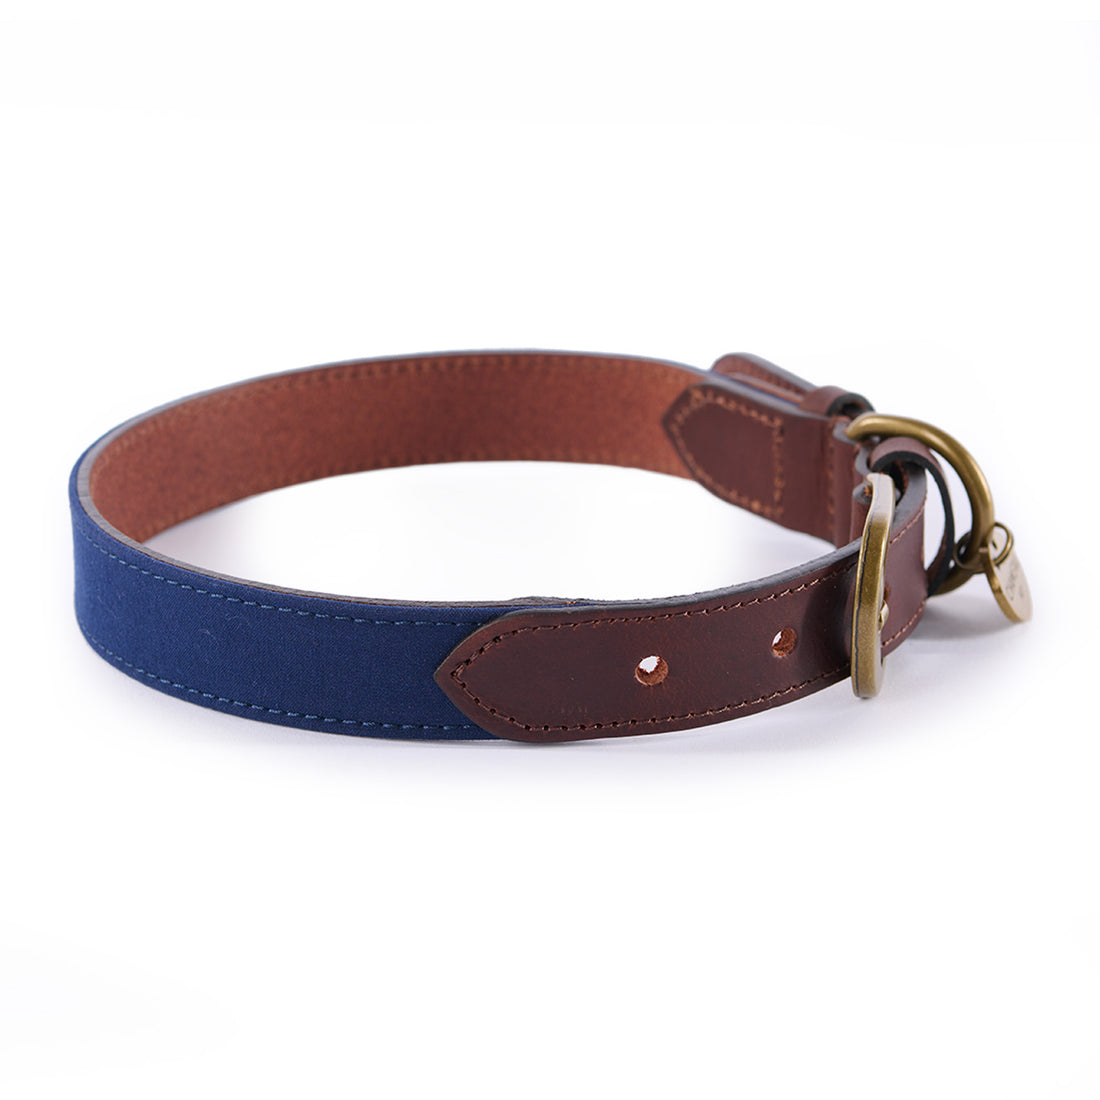 Le-Chameau-Large-Waxed-Cotton-and-Leather-Dog-Collar